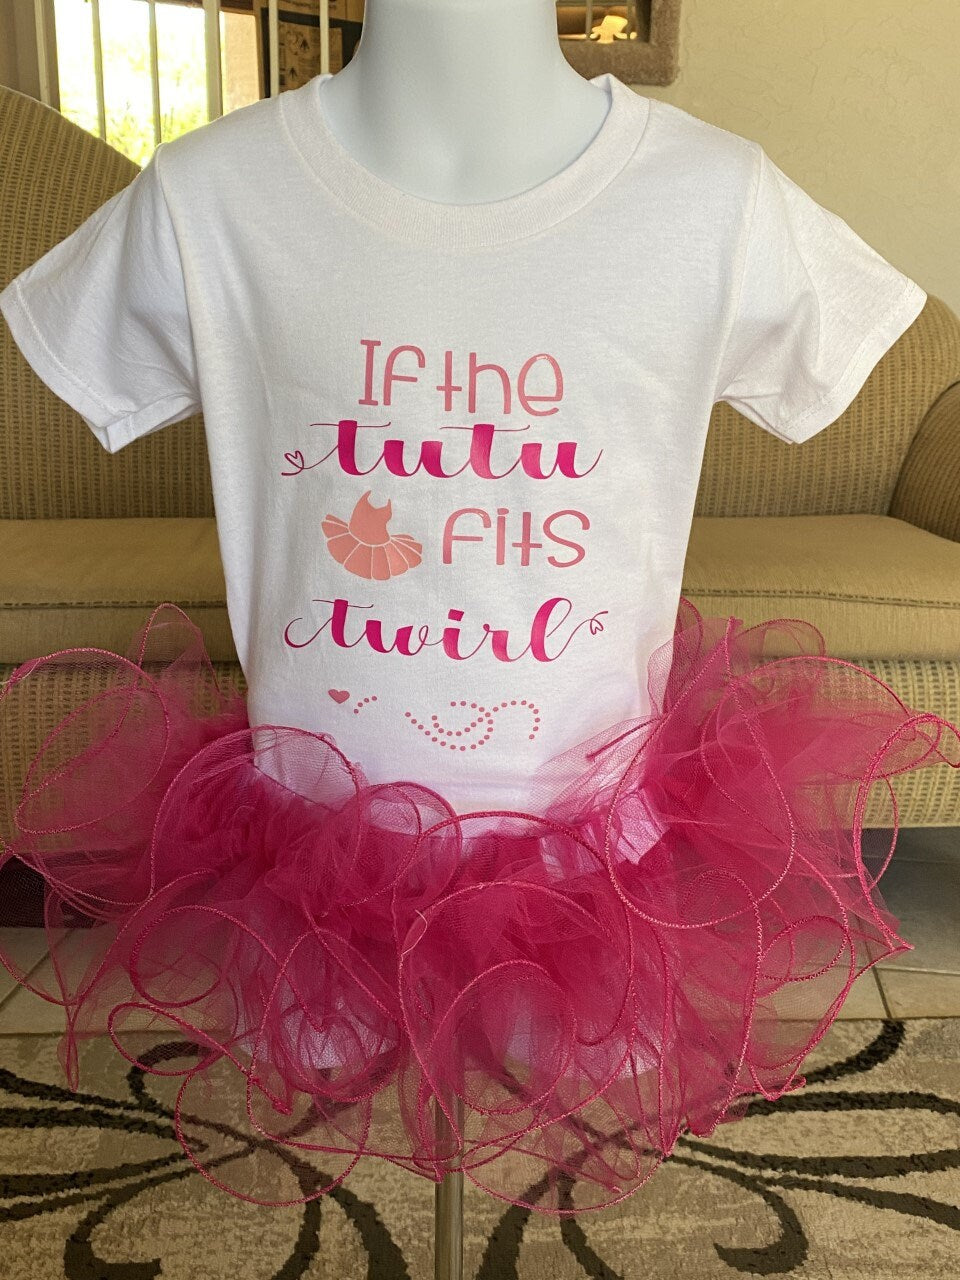 If the tutu fits, TWIRL! toddler infant teen tutu dress photo prop fan favorite best seller best selling gift present birthday outfit cute